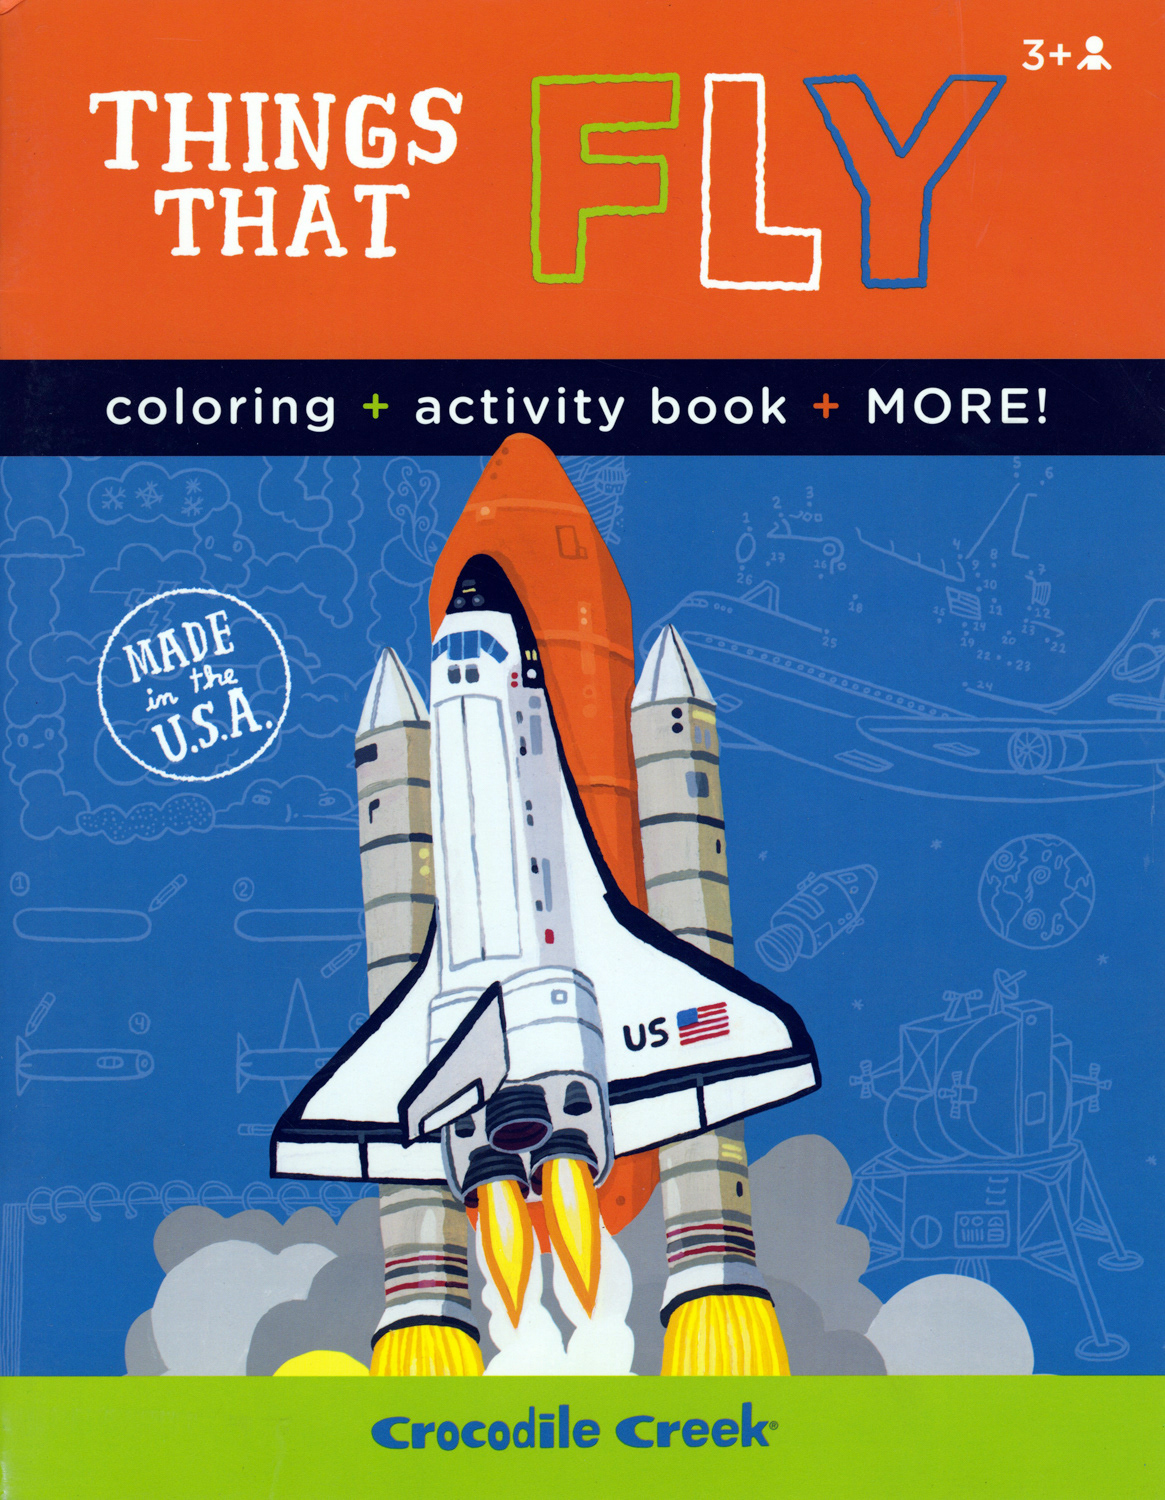 space shuttle Fly planes nasa Space  rocket blast off kids things that fly Aaron Meshon book poster usa space travel outerspace